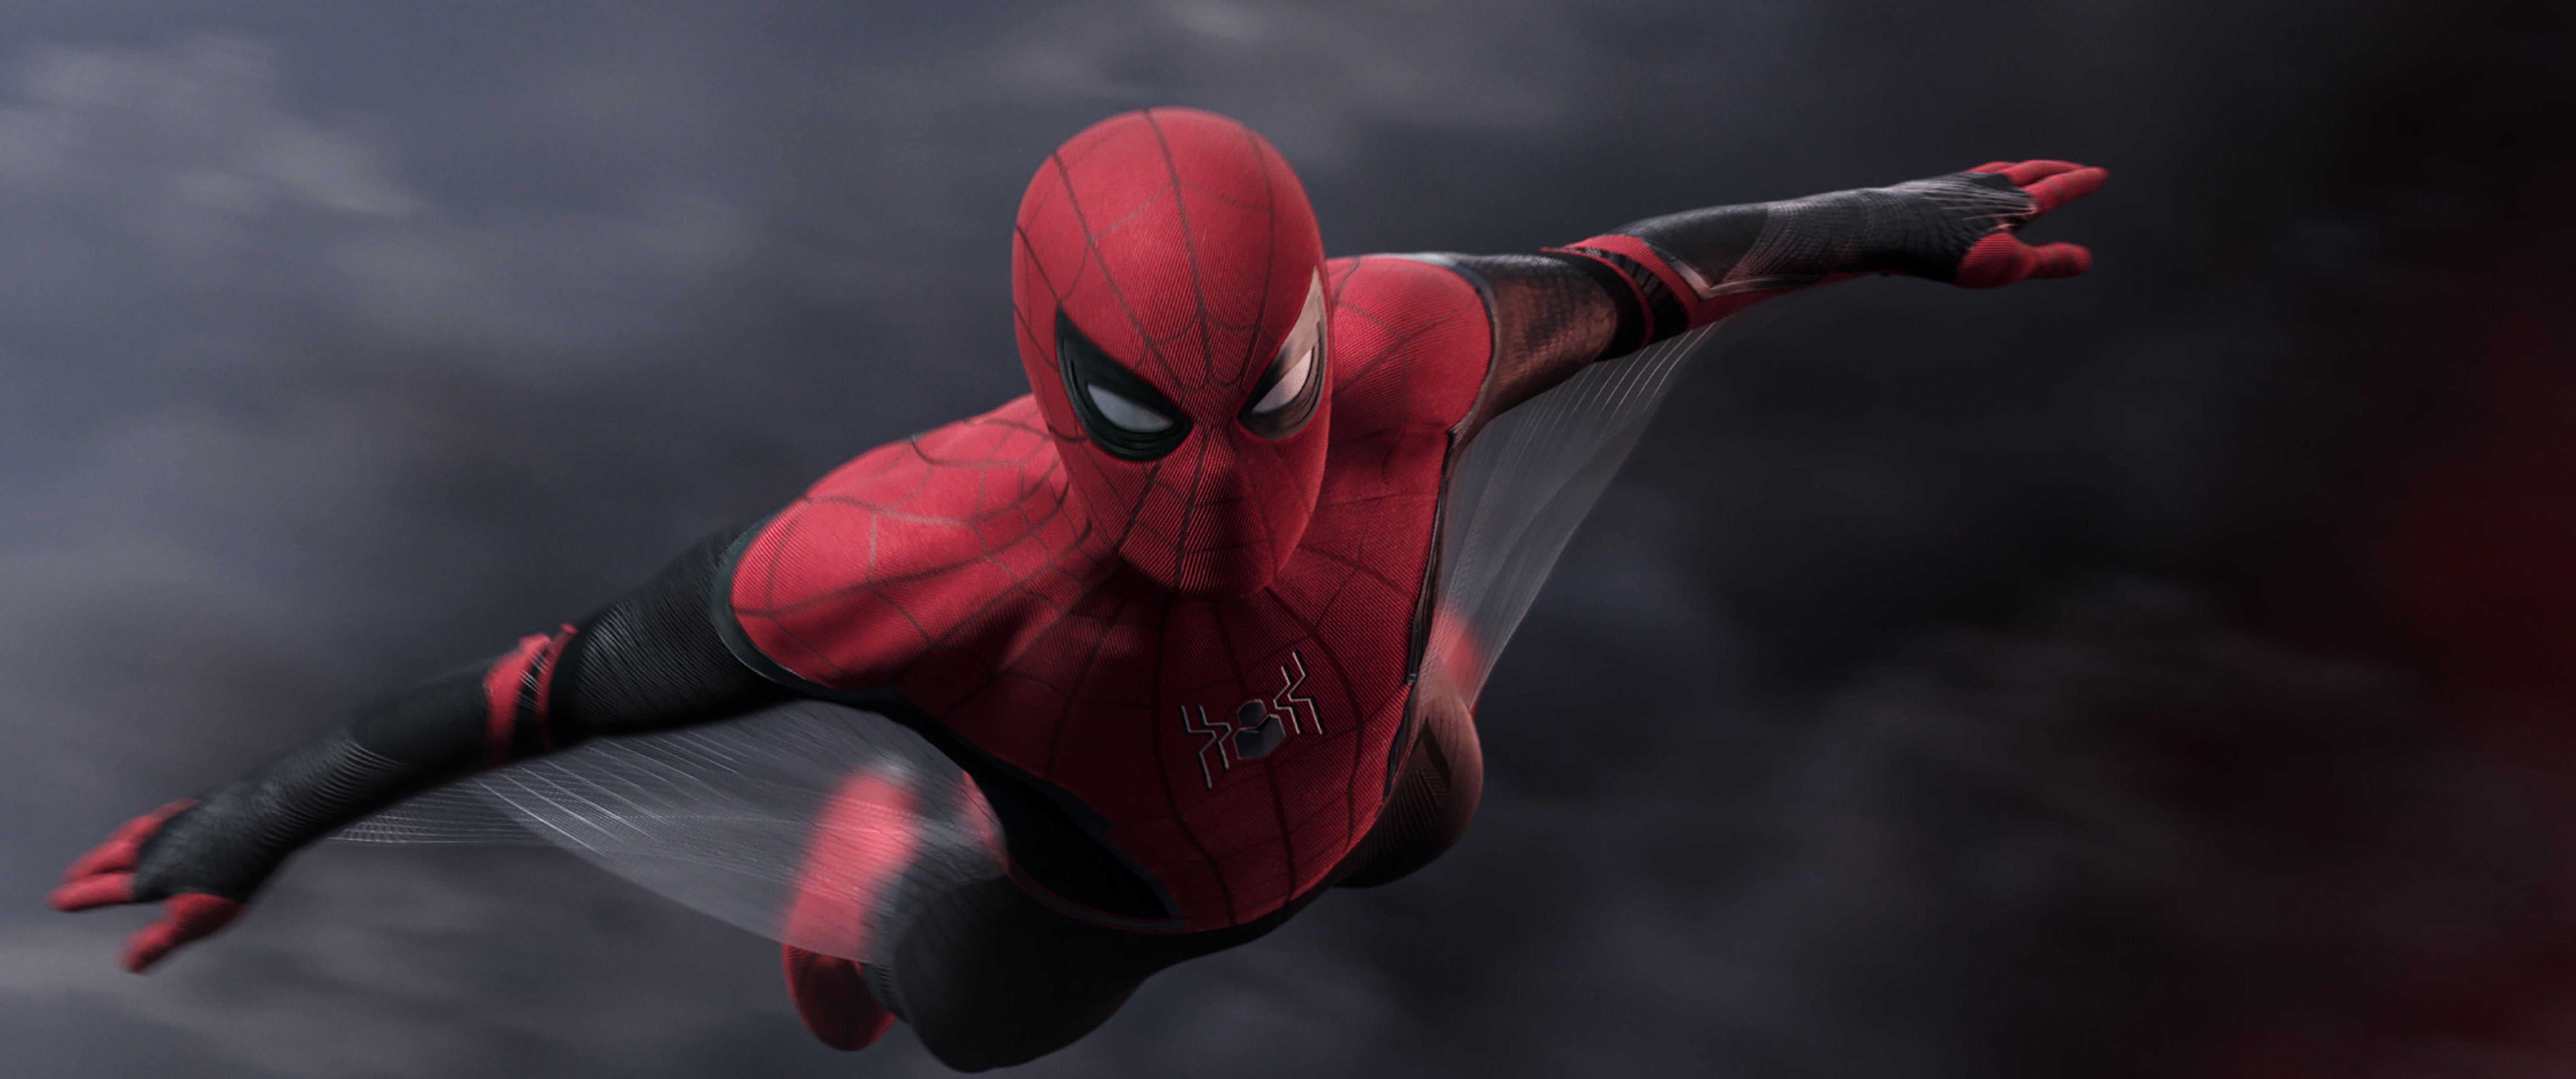 for apple download Spider-Man: Far From Home